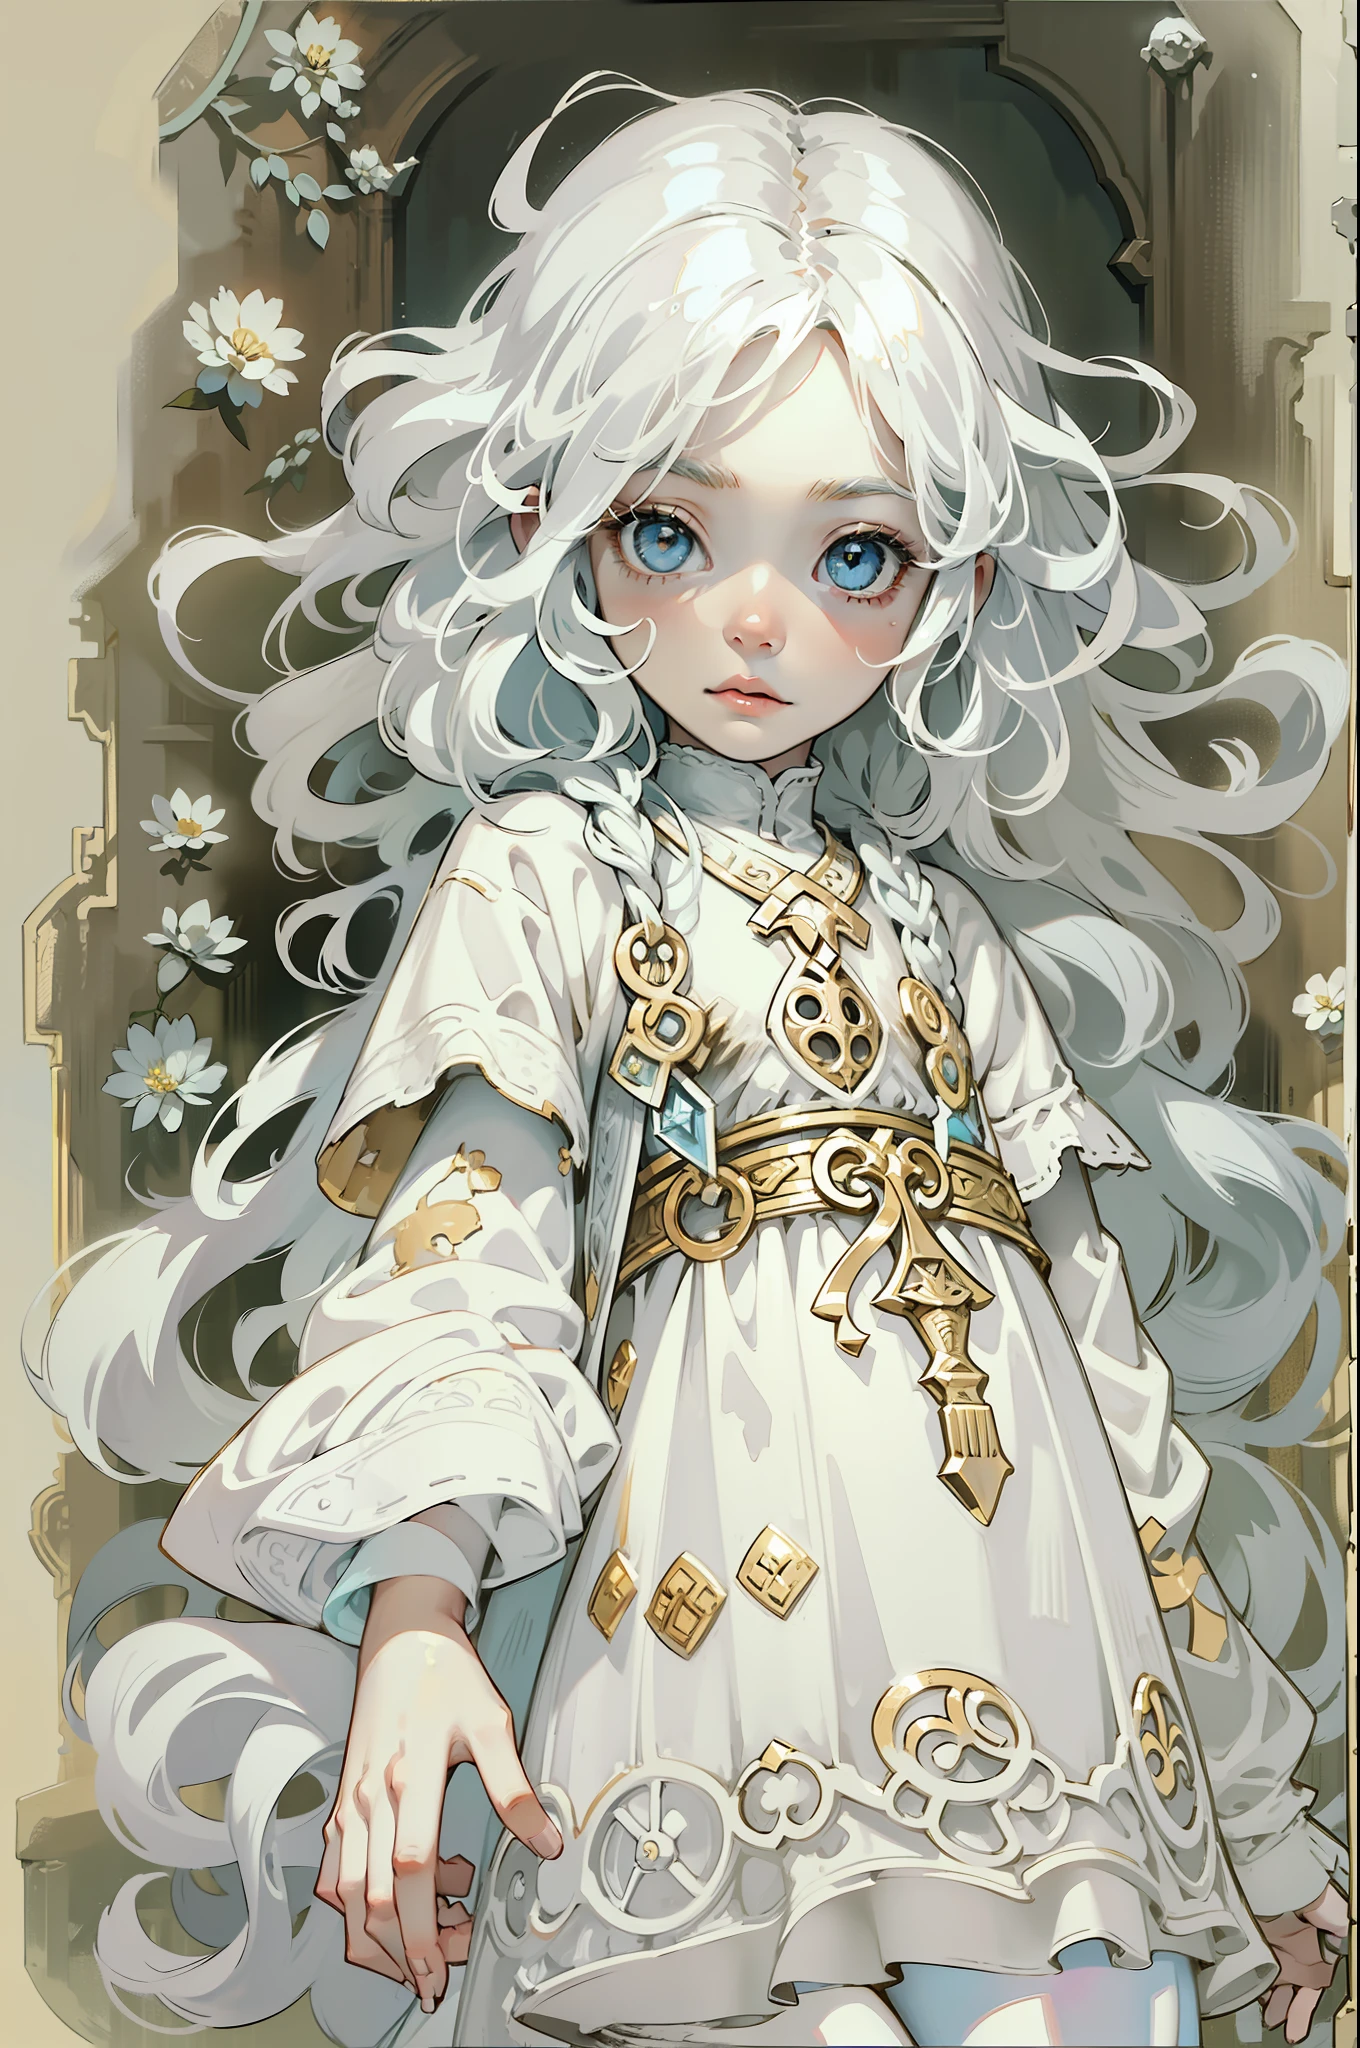 "A girl ghost with pale, paper-white skin, wild and disheveled bright white hair, and mesmerizing white eyes adorned with spirals, wearing tattered clothing and clutching onto an aged plush toy."